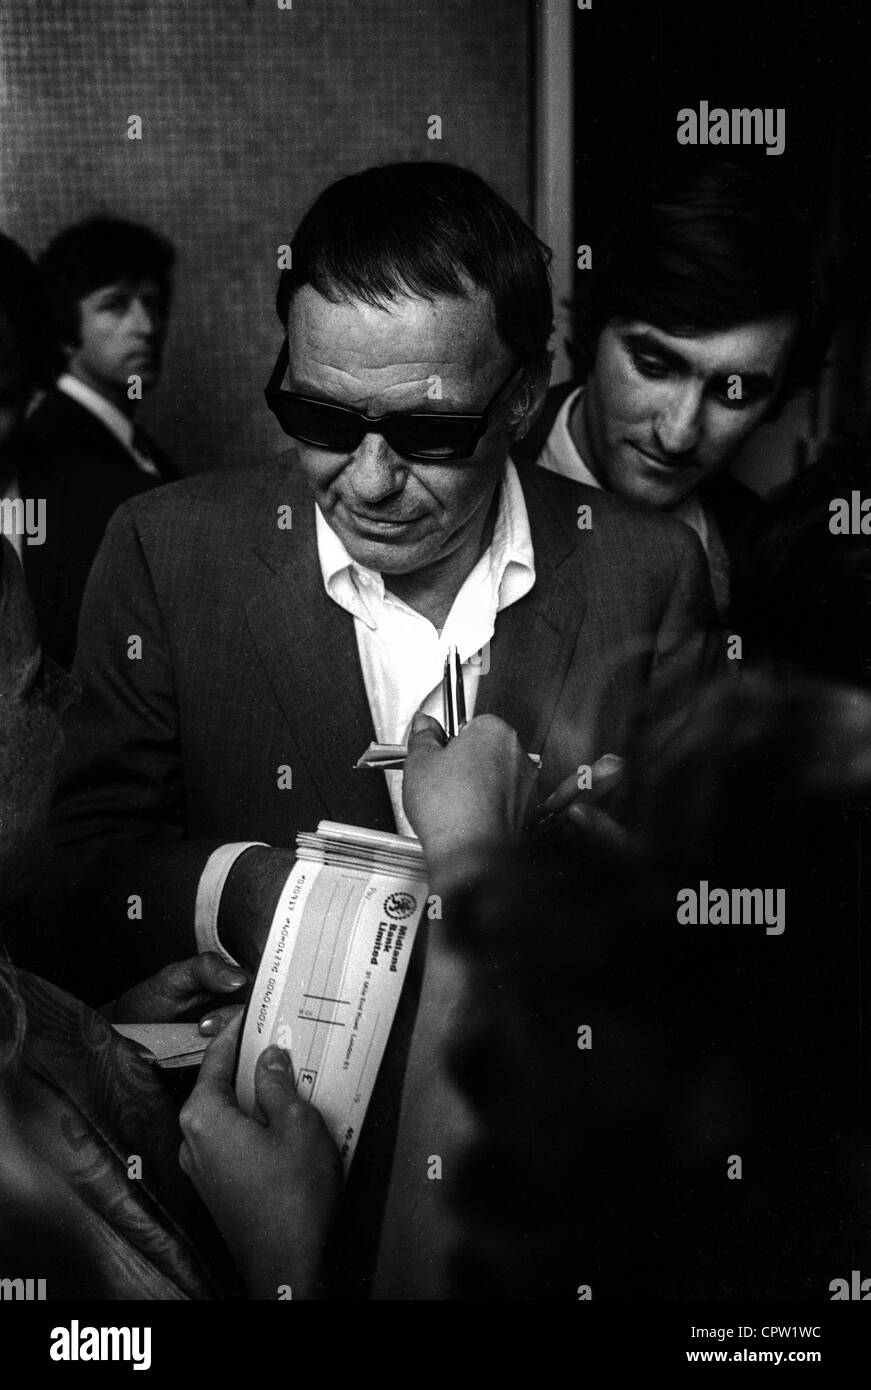 Frank Sinatra writes autographs and somebody in the crowd holds out a pen and a chequebook / checkbook Stock Photo